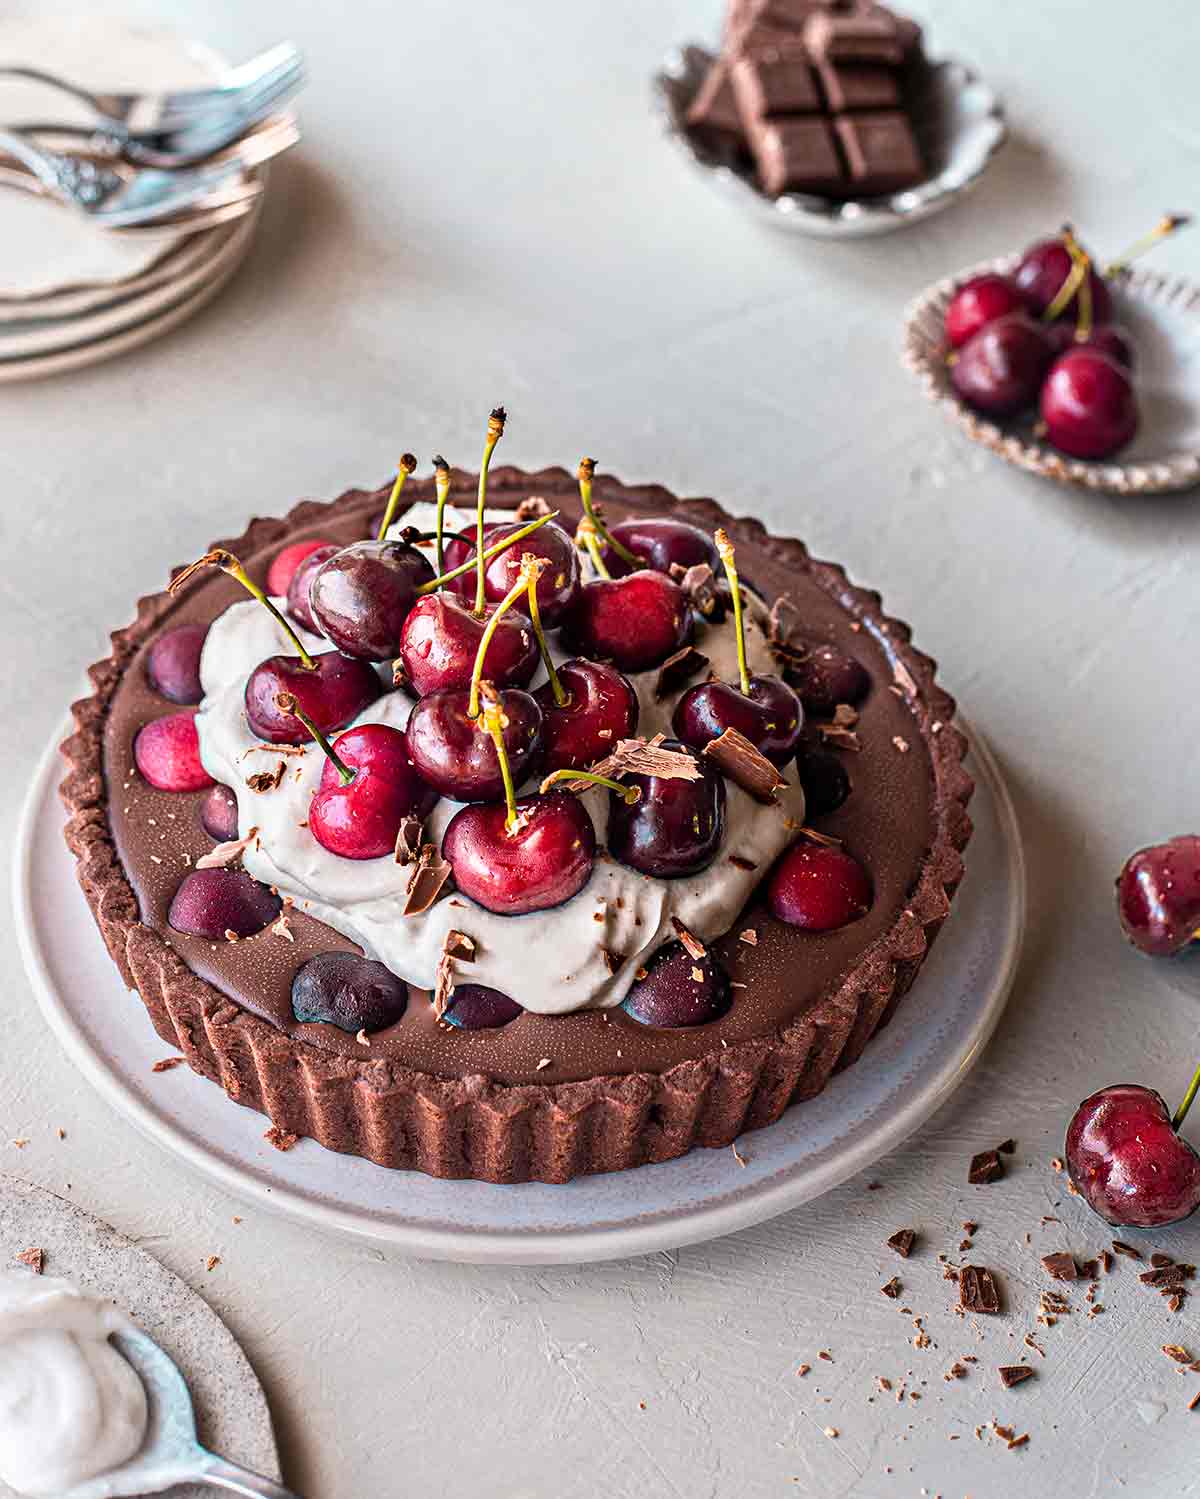 Vegan Blackforest tart with a chocolate base, ganache filling, coconut cream topping and lots of cherries on top. Tart is on plate surrounded by more fresh cherries and serving plates